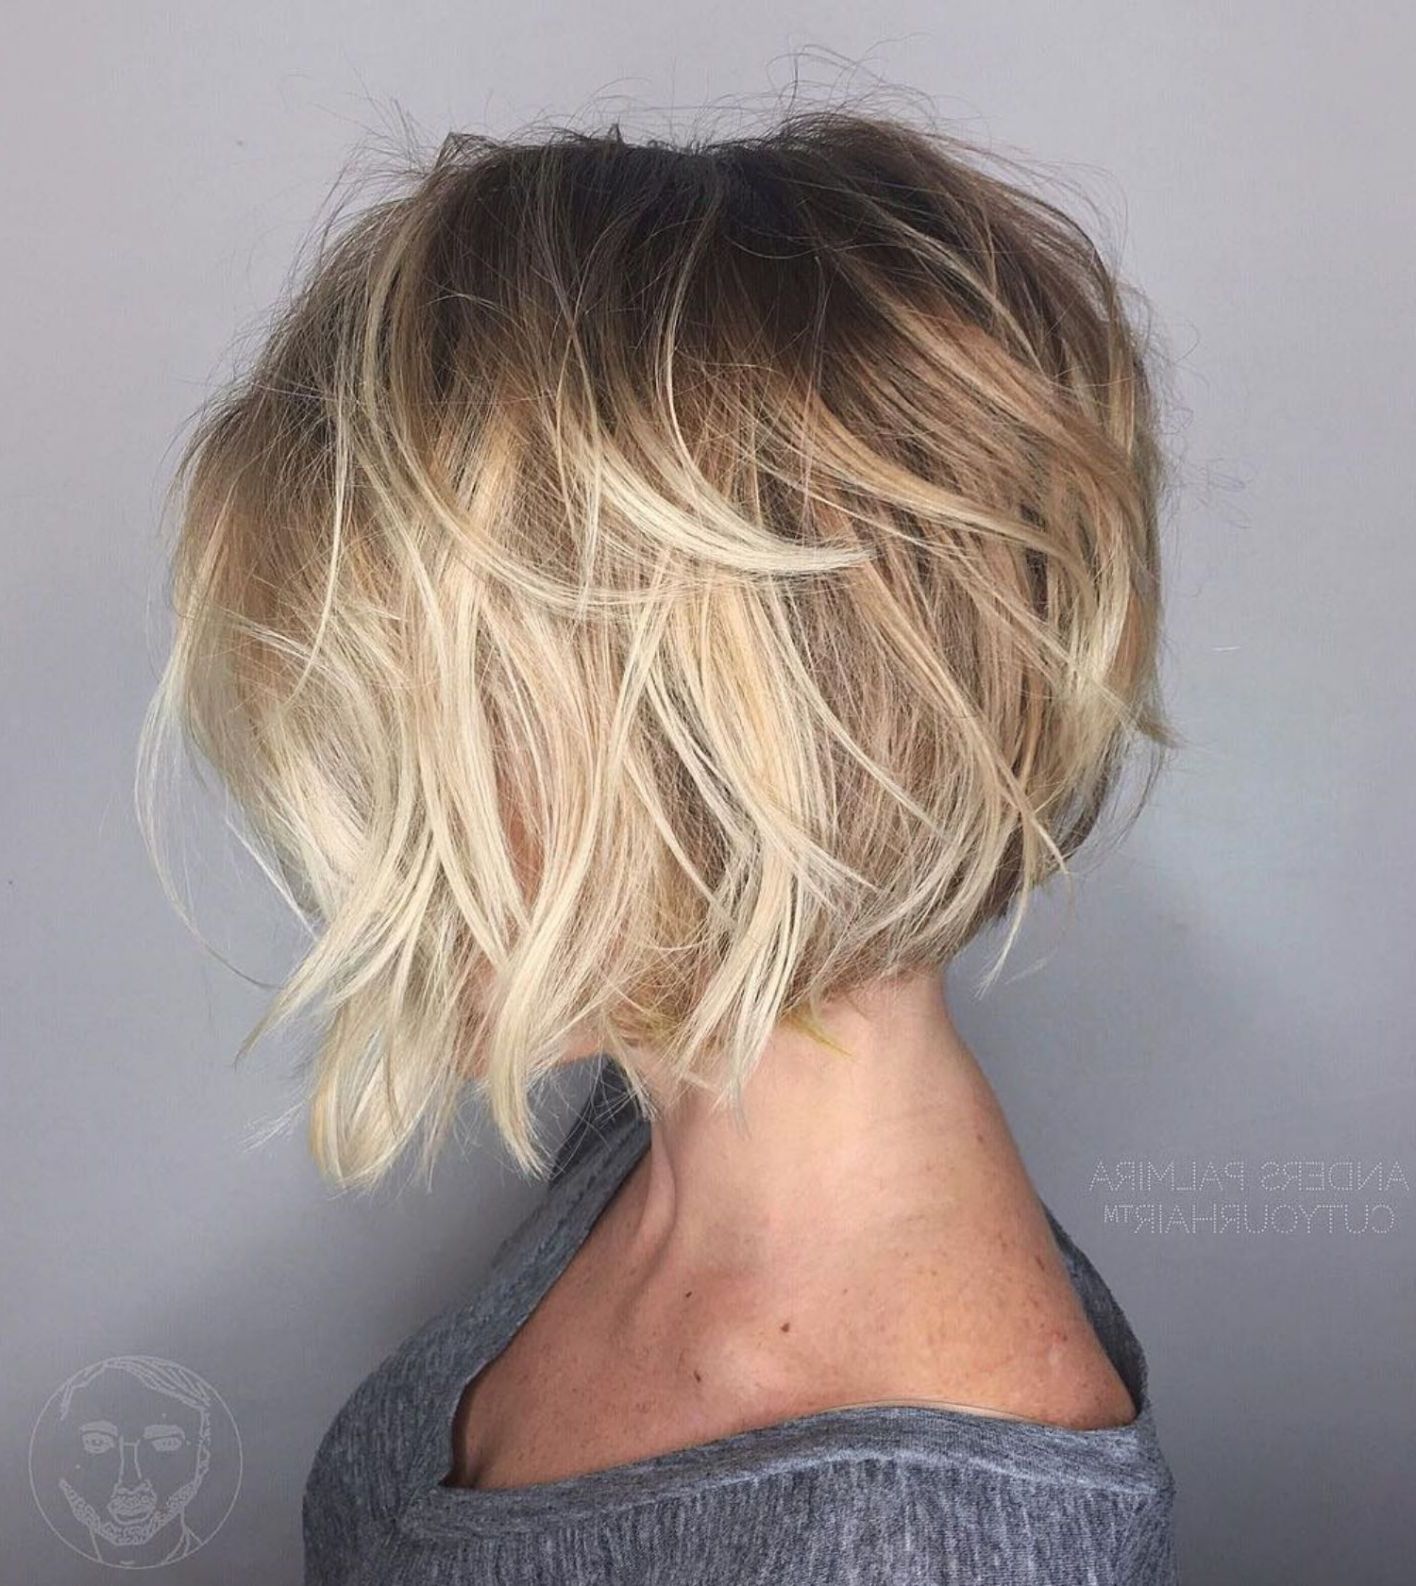 Most Popular Smart Short Bob Hairstyles With Choppy Ends Regarding Hairstyles : Choppy Bob Hairstyles 40 Inspiration 60 Best (View 11 of 20)